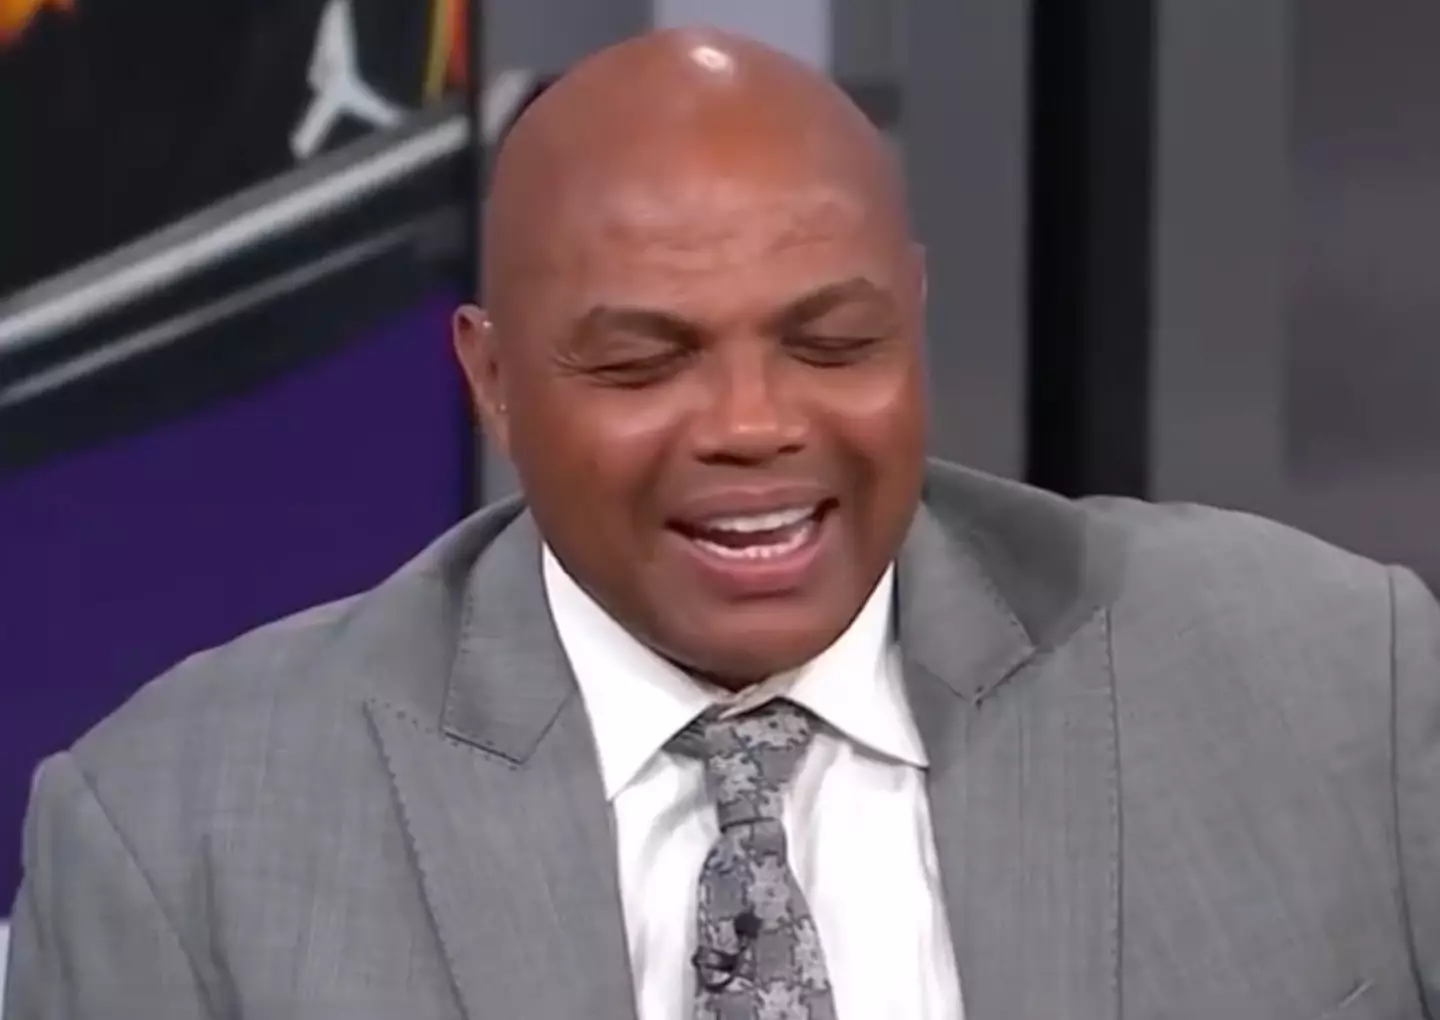 Charles Barkley says he's still not been paid for his $10,000 bet with Shaquille O'Neal.